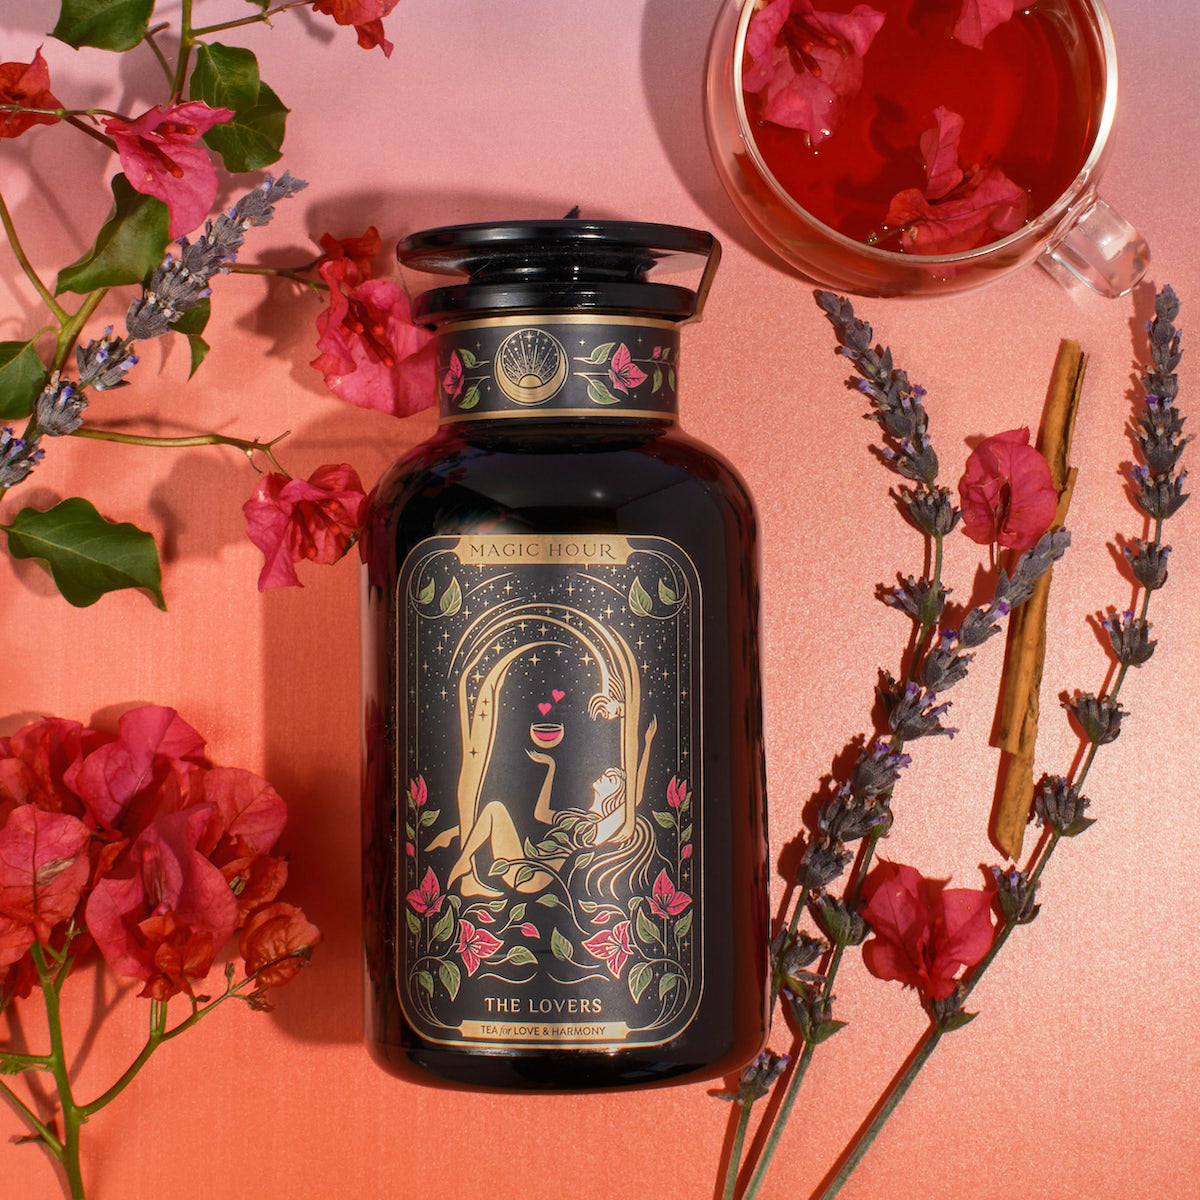 Dark glass container labeled "Magic Hour - The Lovers," surrounded by pink flowers, lavender stalks, cinnamon stick, and Organic Hibiscus on a gradient pink background. A teacup with red tea is positioned in the top right corner of the image.